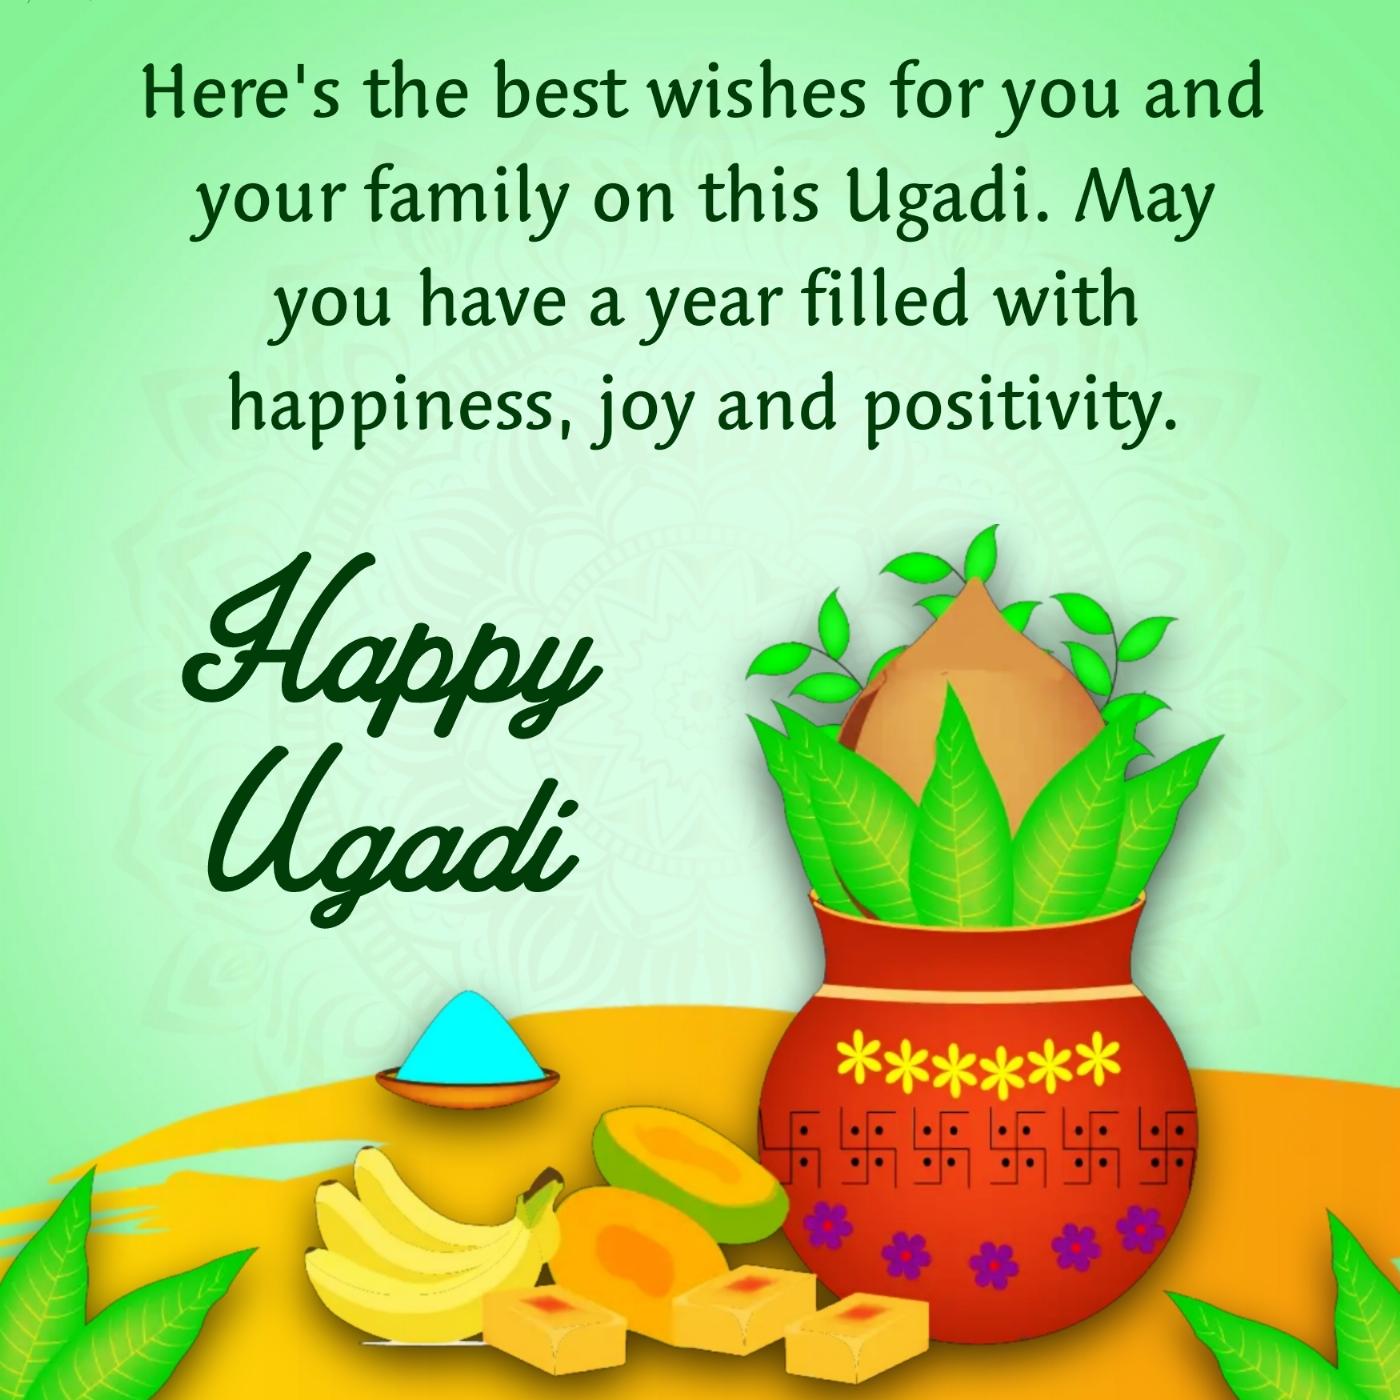 Here's the best wishes for you and your family on this Ugadi